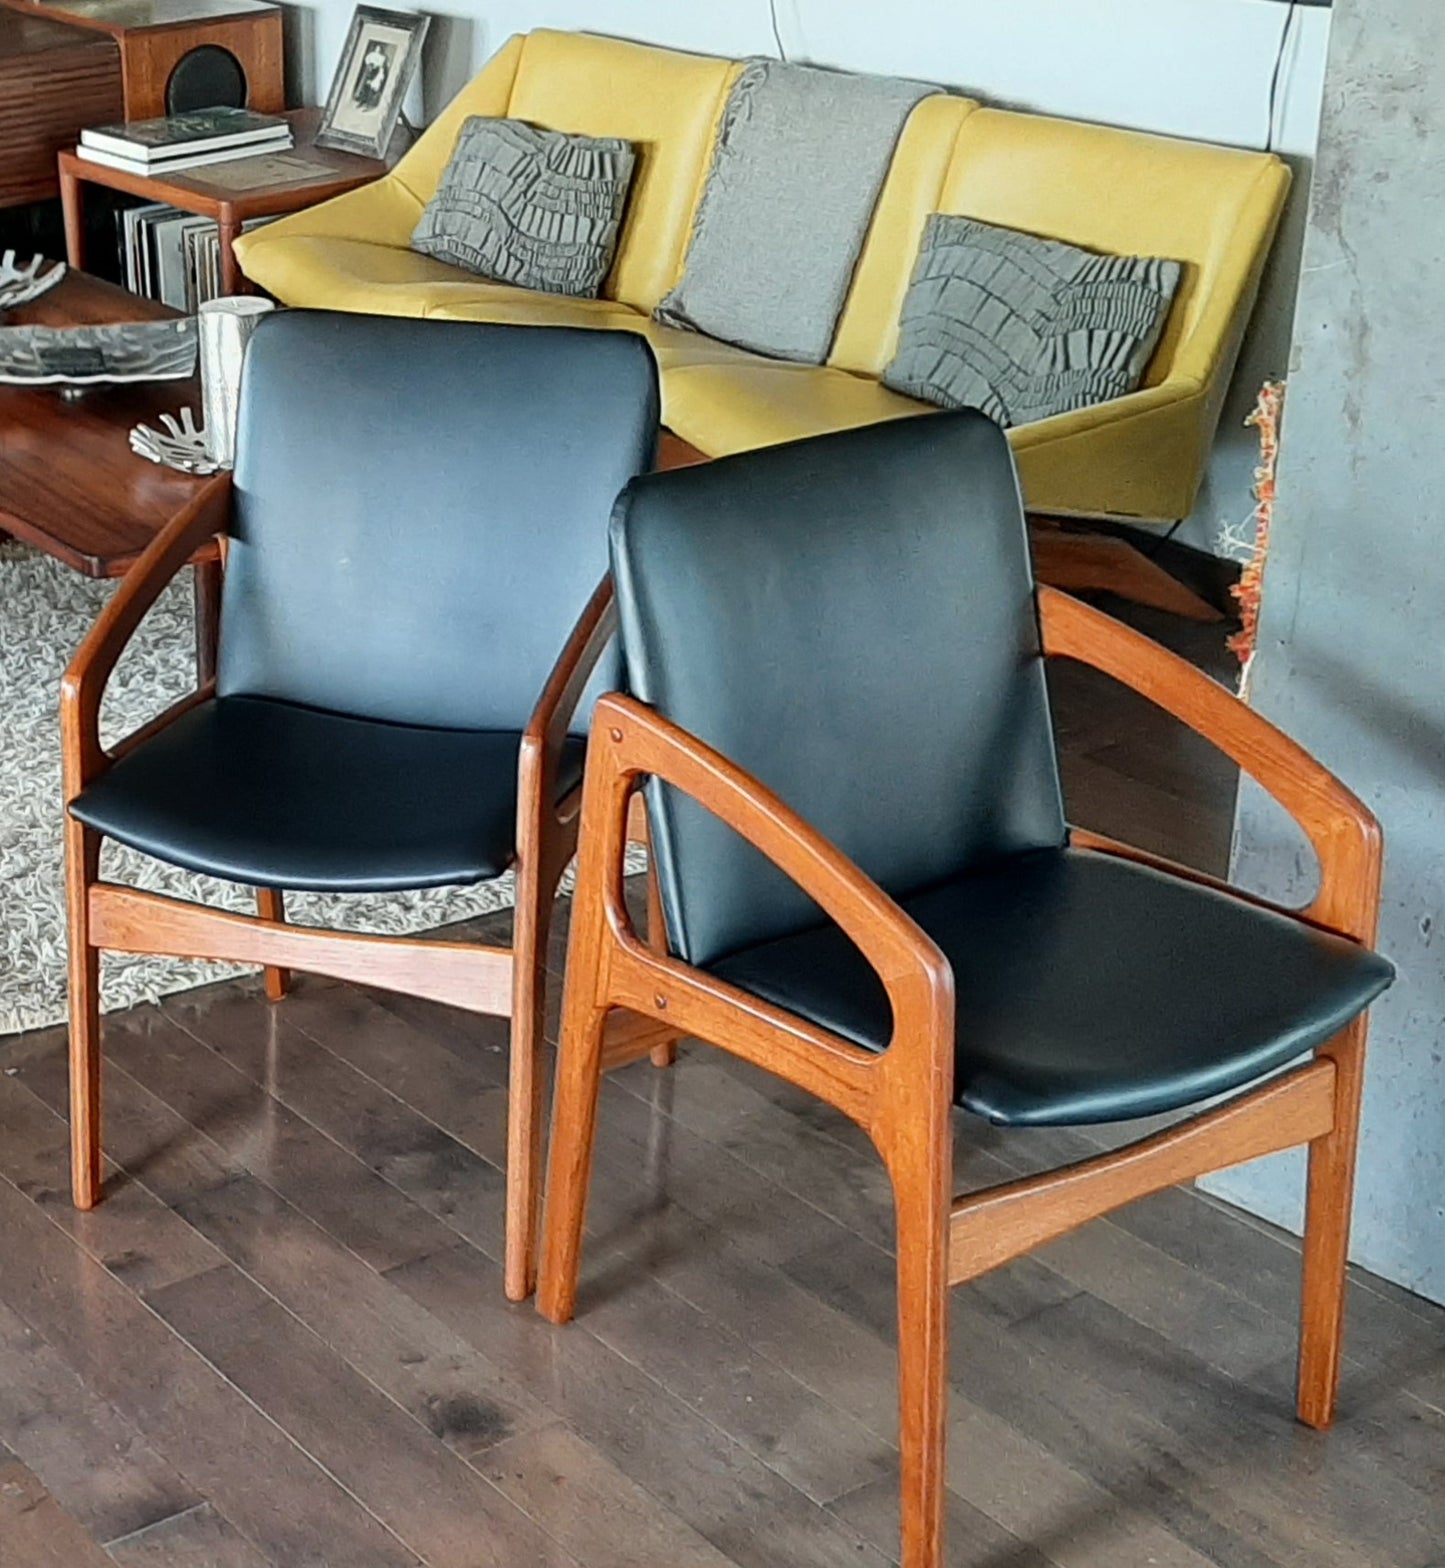 2 REFINISHED REUPHOLSTERED Danish MCM Angled Arm Chairs by H. Kjaernulf